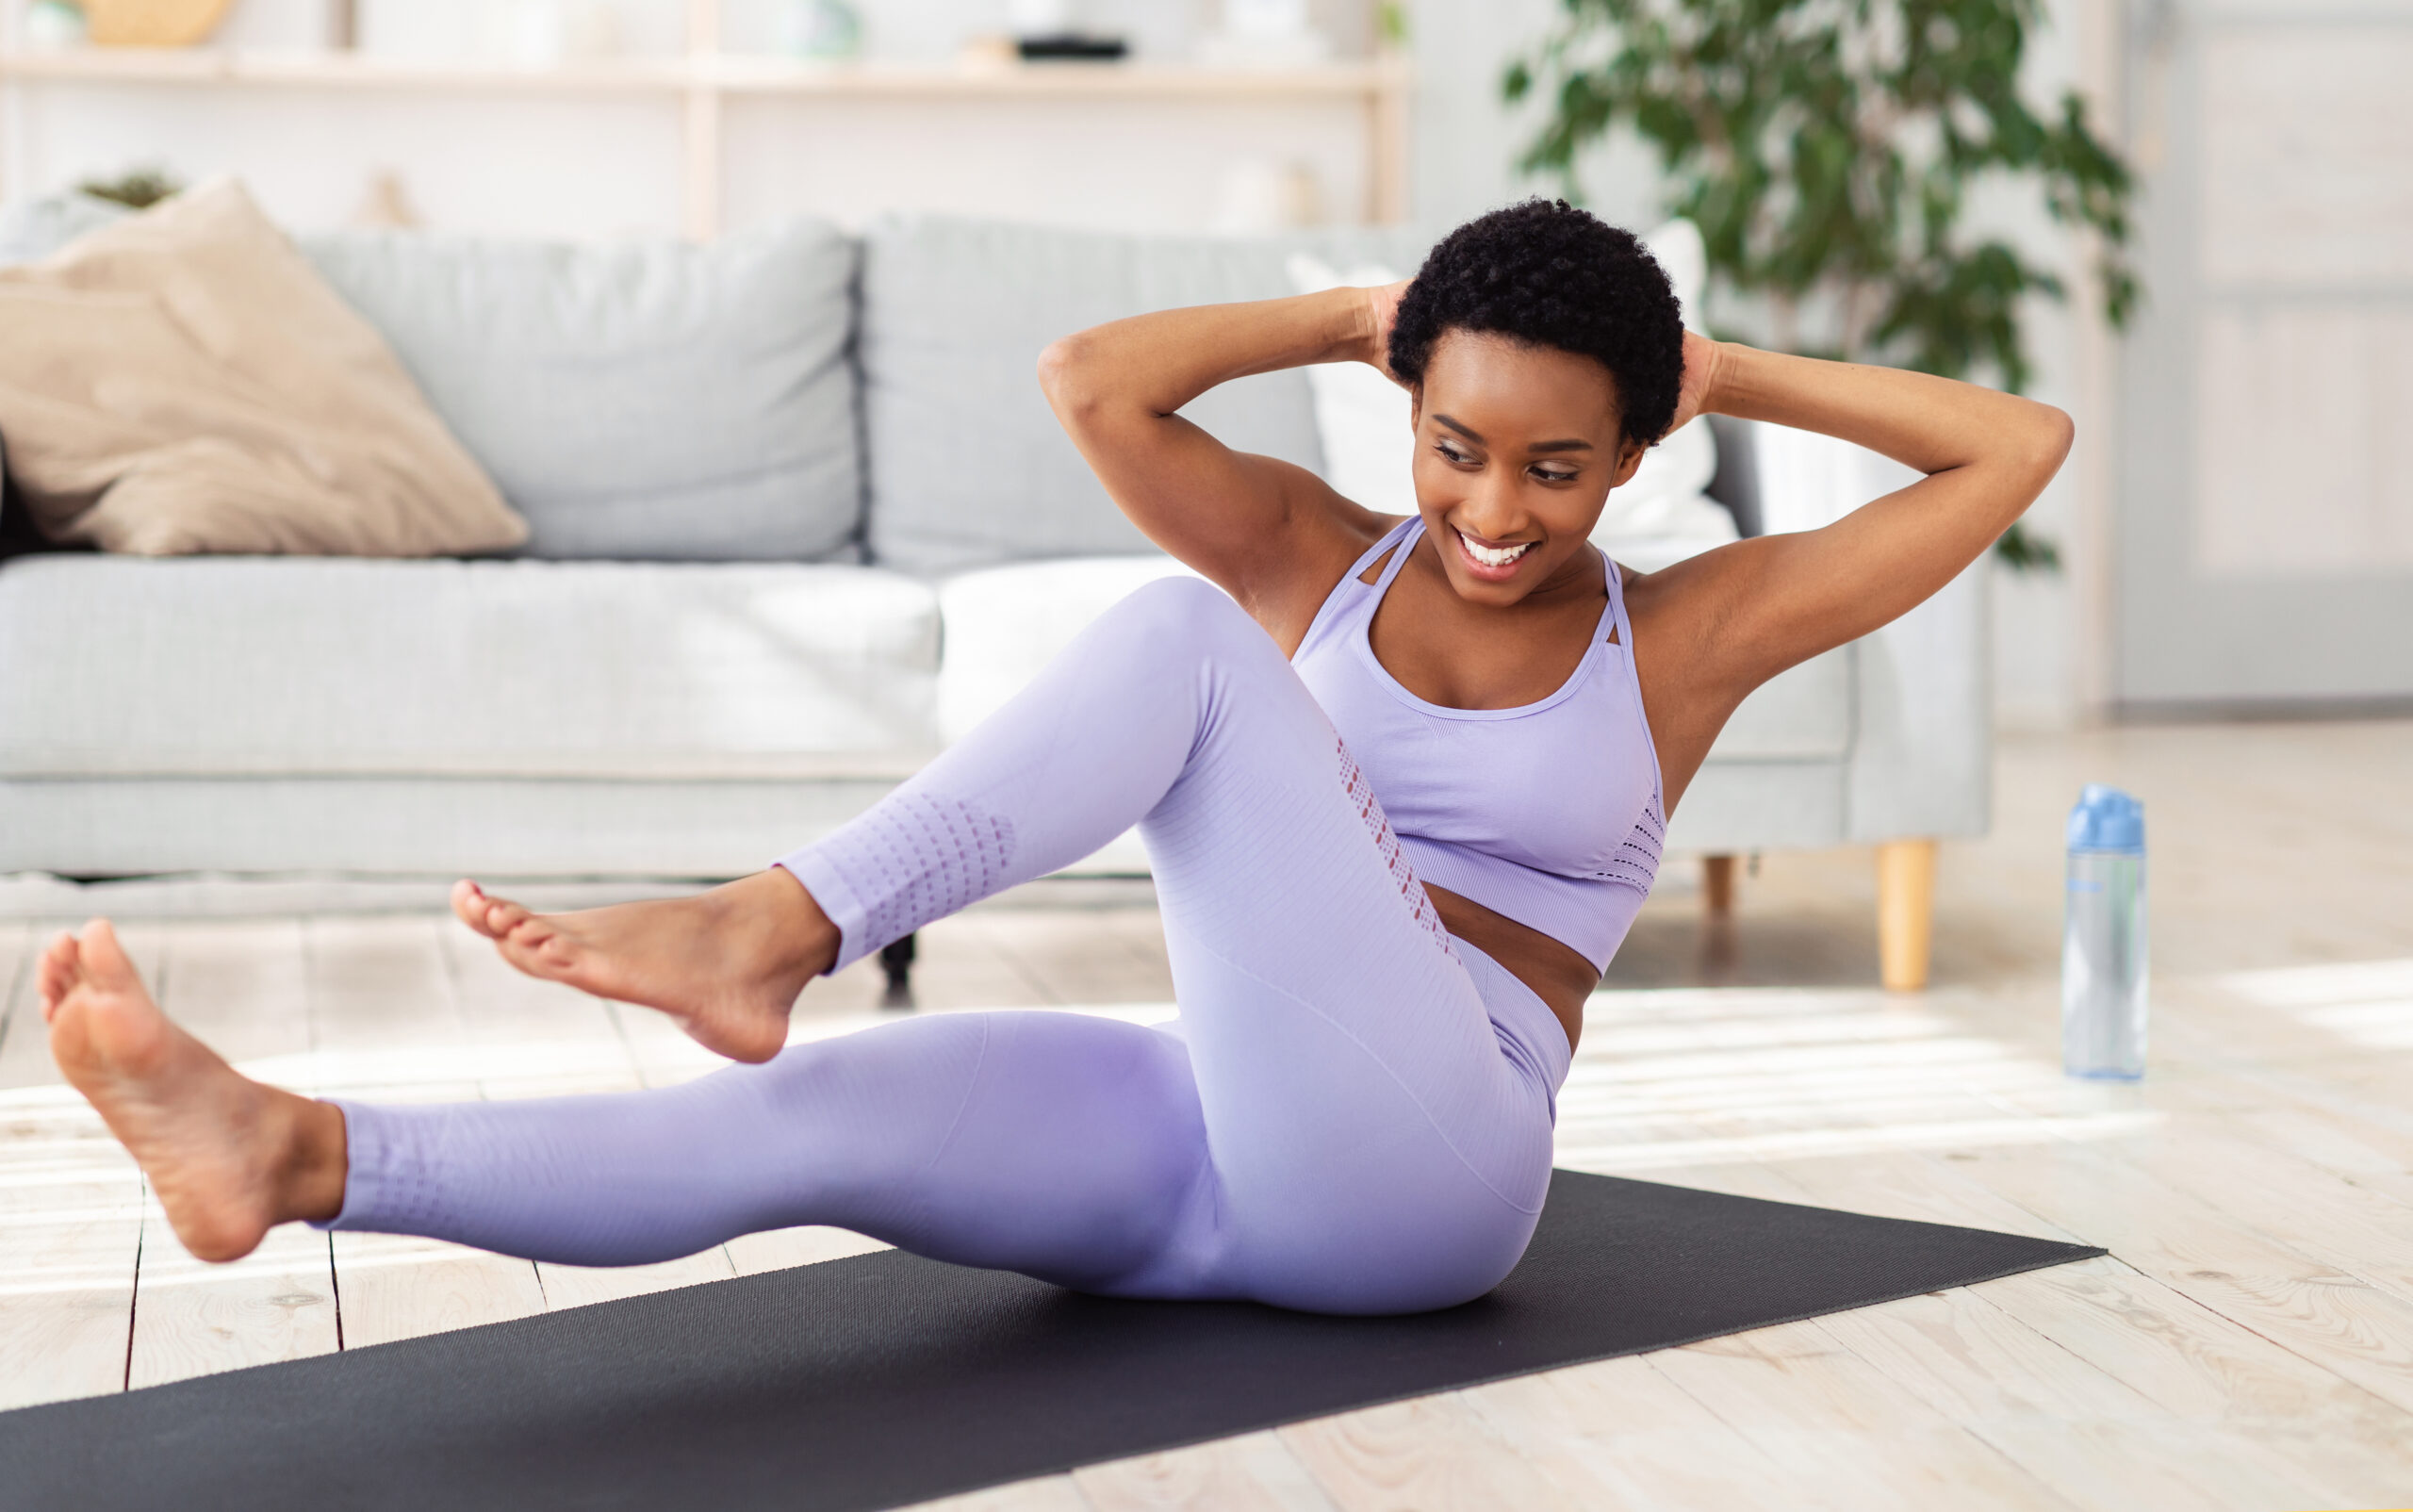 Sports during lockdown. Beautiful black lady doing home fitness on yoga mat, working out her whole body. Lovely African American woman having domestic training, exercising in living room